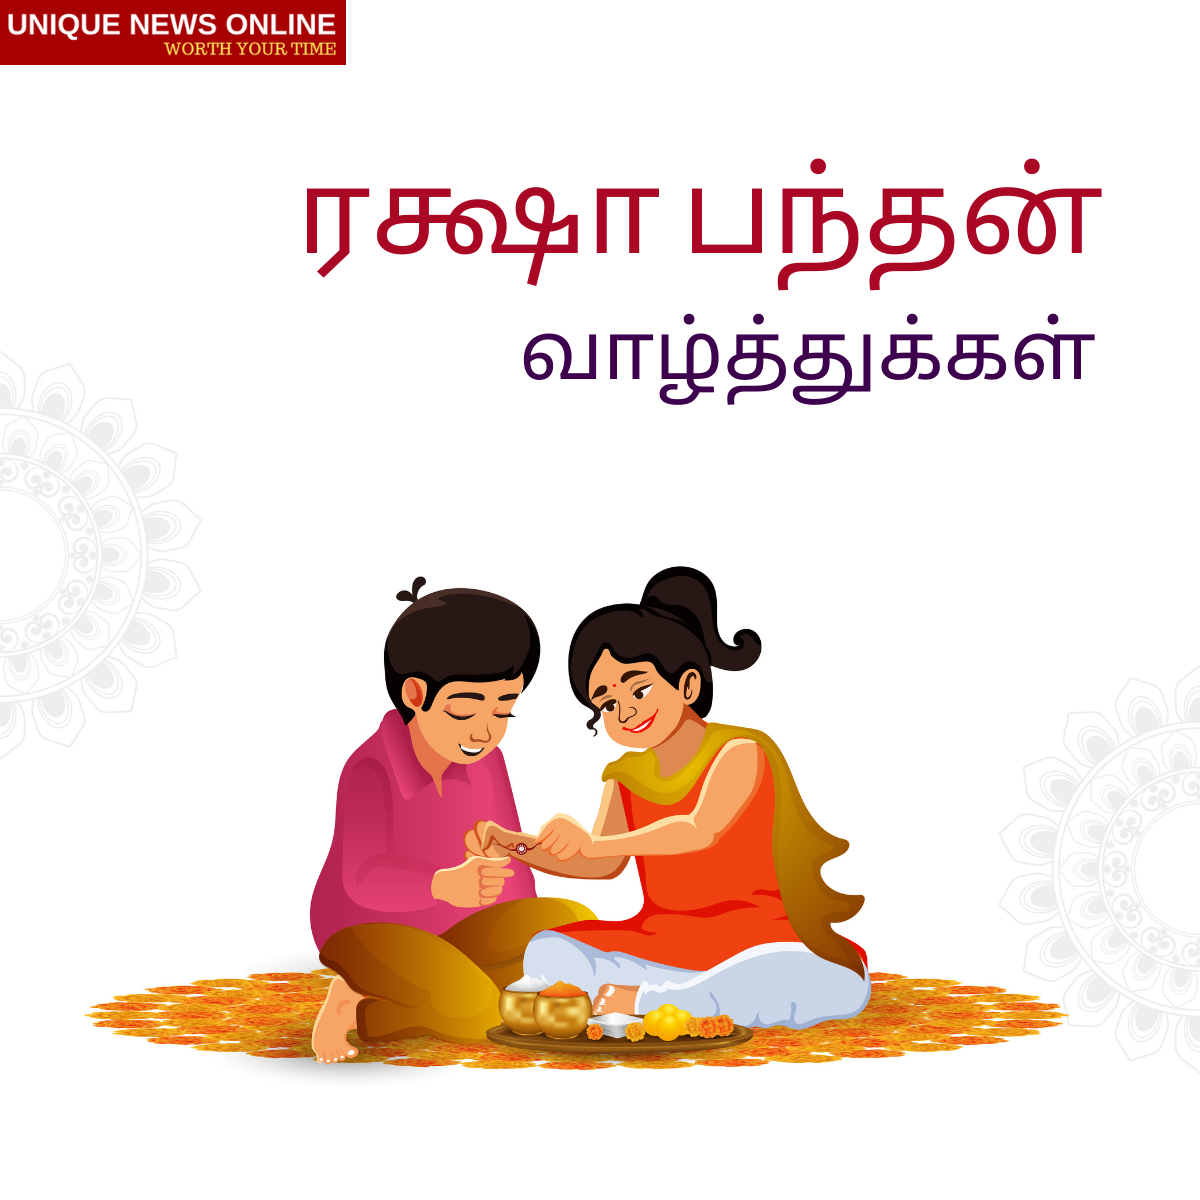 Happy Rakhi 2022: Raksha Bandhan Tamil and Malayalam Quotes, Images, Posters, Wishes, Greetings, and Messages to greet your sister/brother